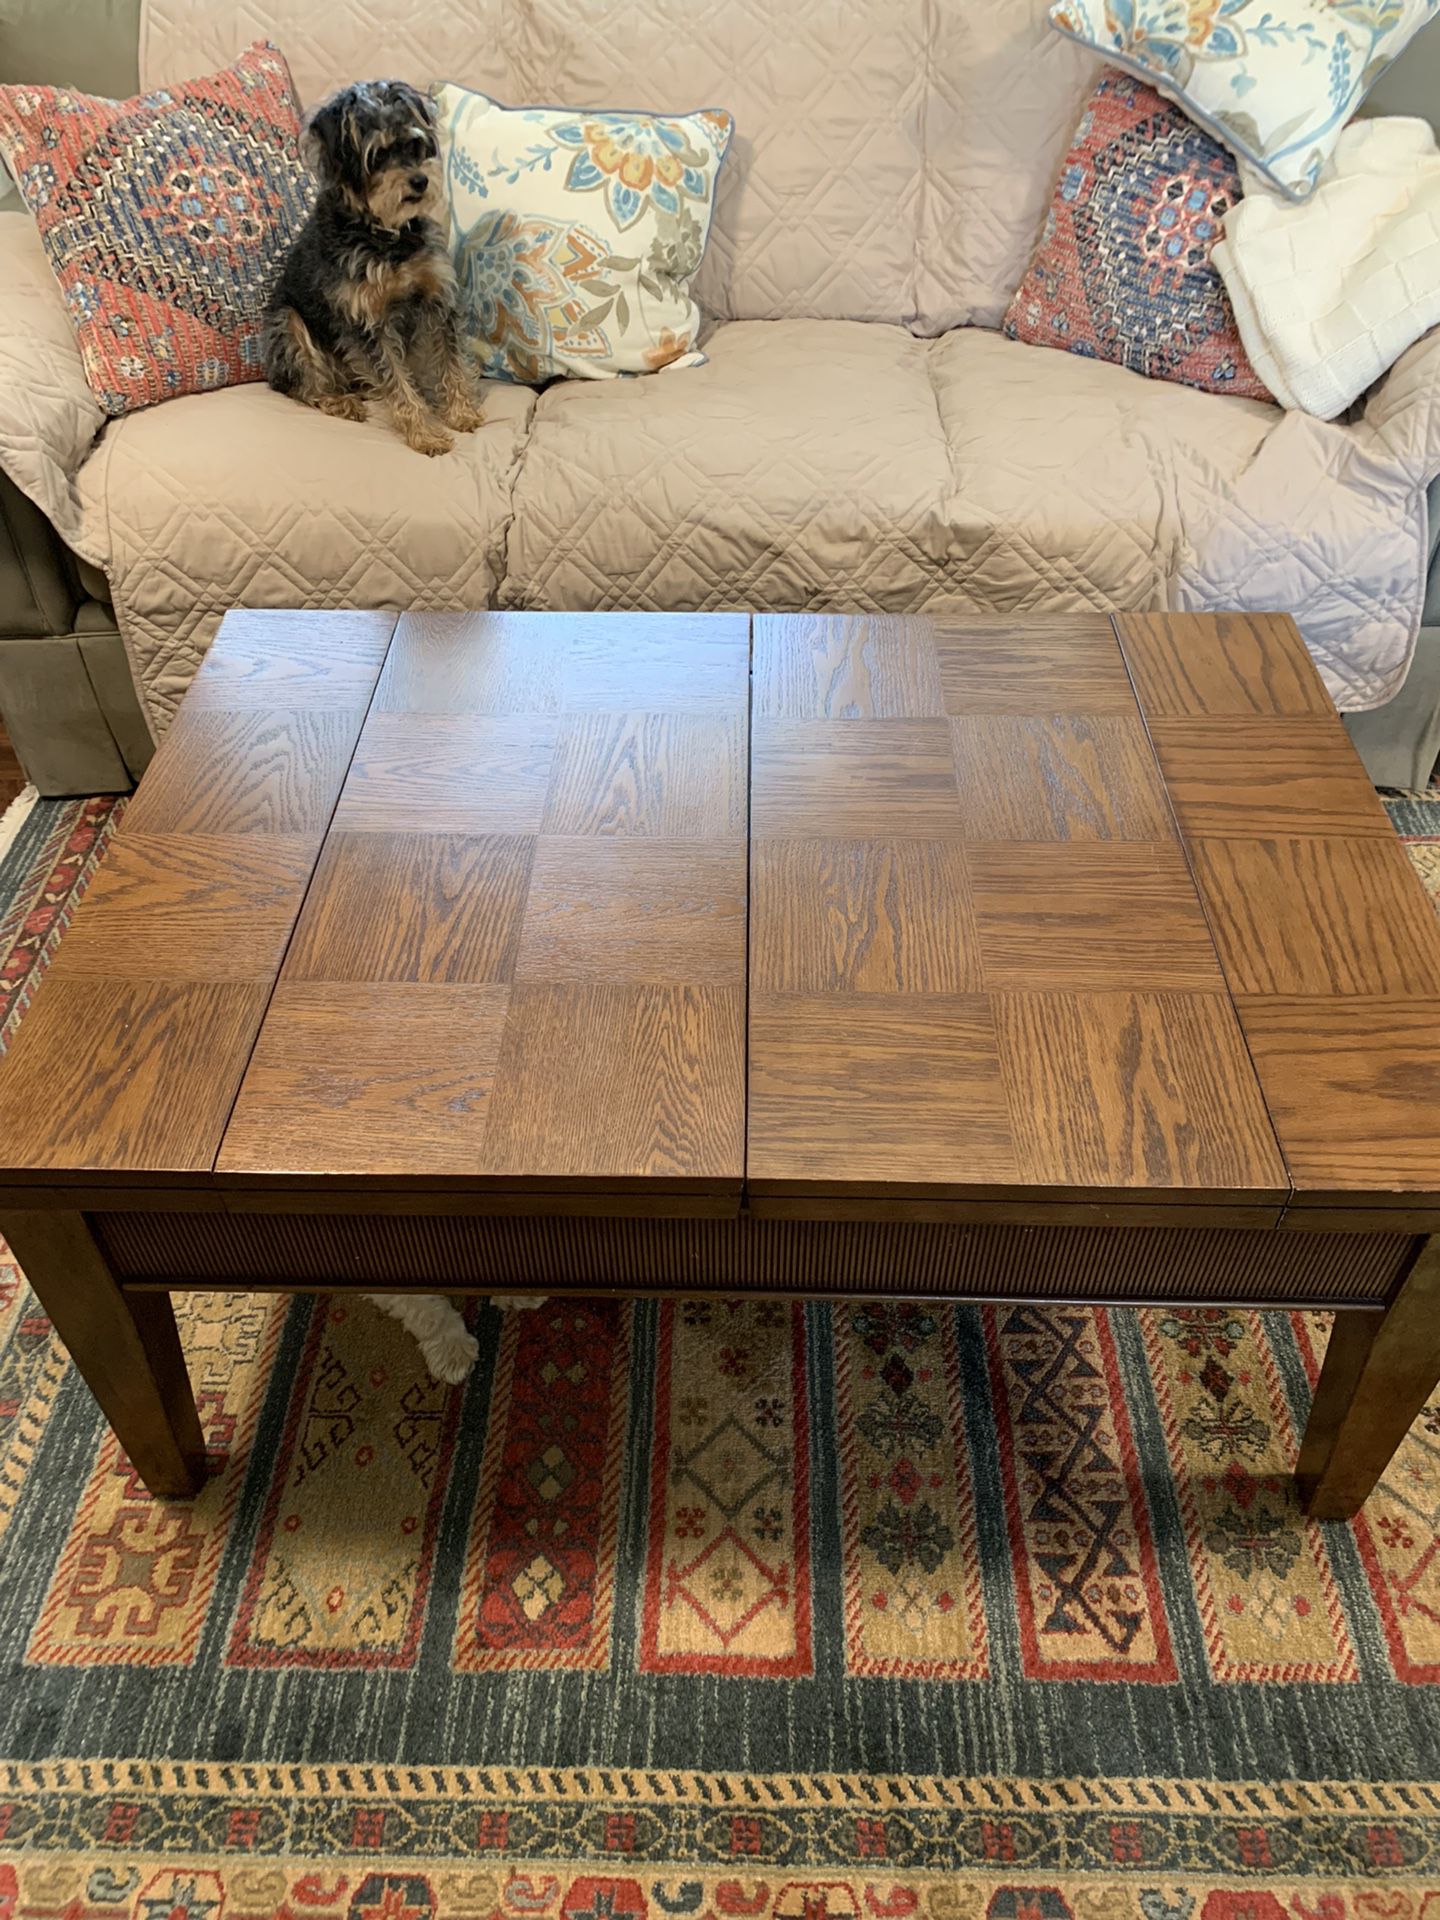 Coffee Table. Opens For Game Boards